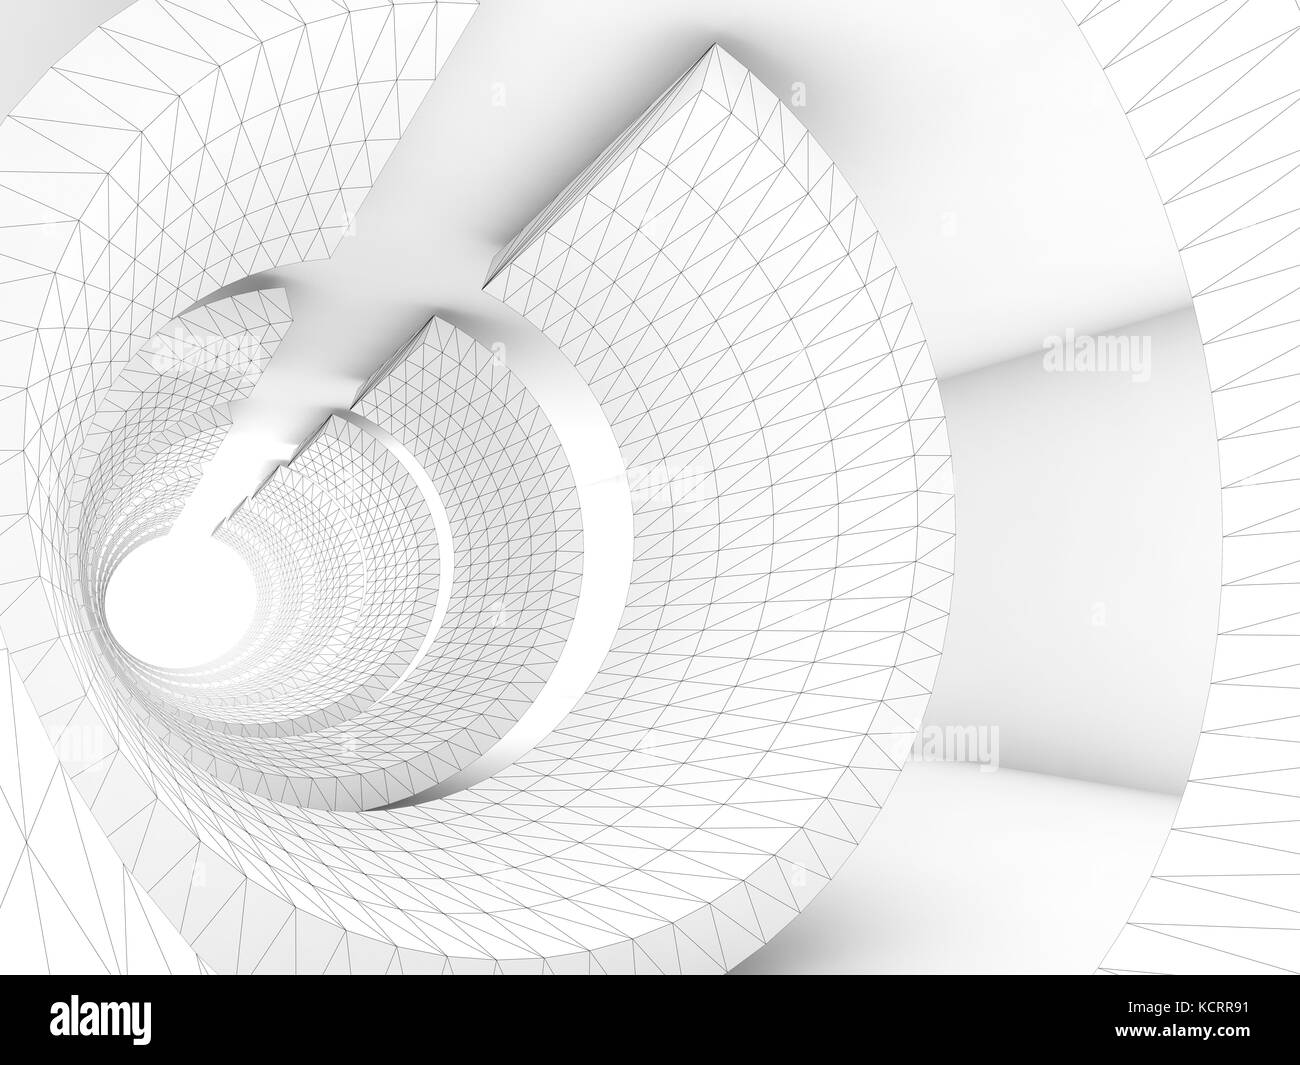 White tunnel with wire-frame structure lines, Abstract dark digital background, 3d render illustration Stock Photo